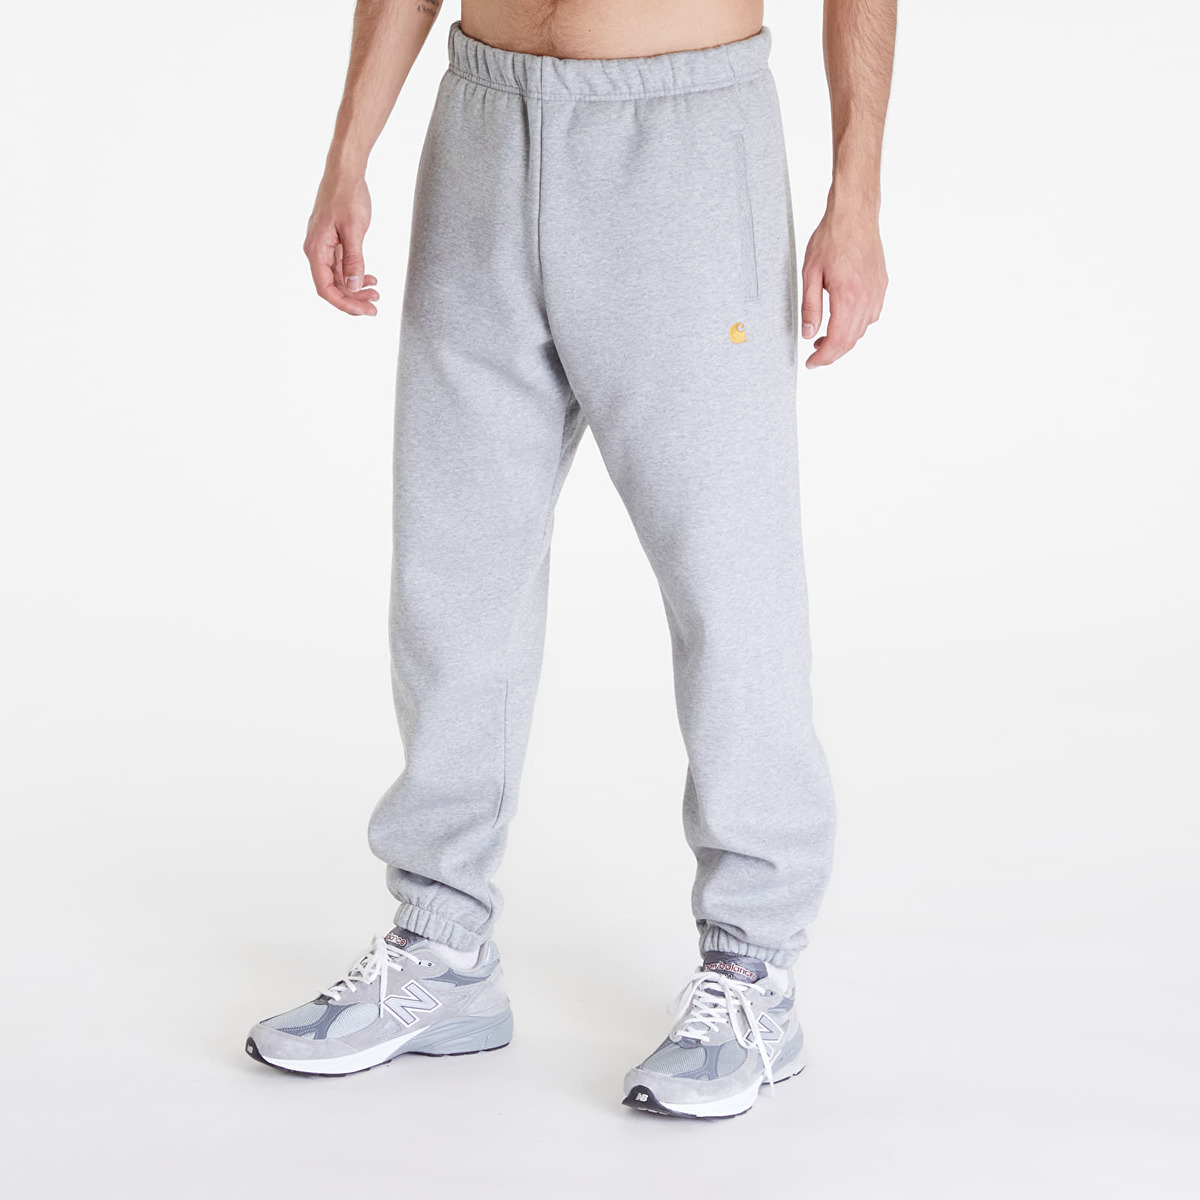 Carhartt WIP Chase Sweat Pant